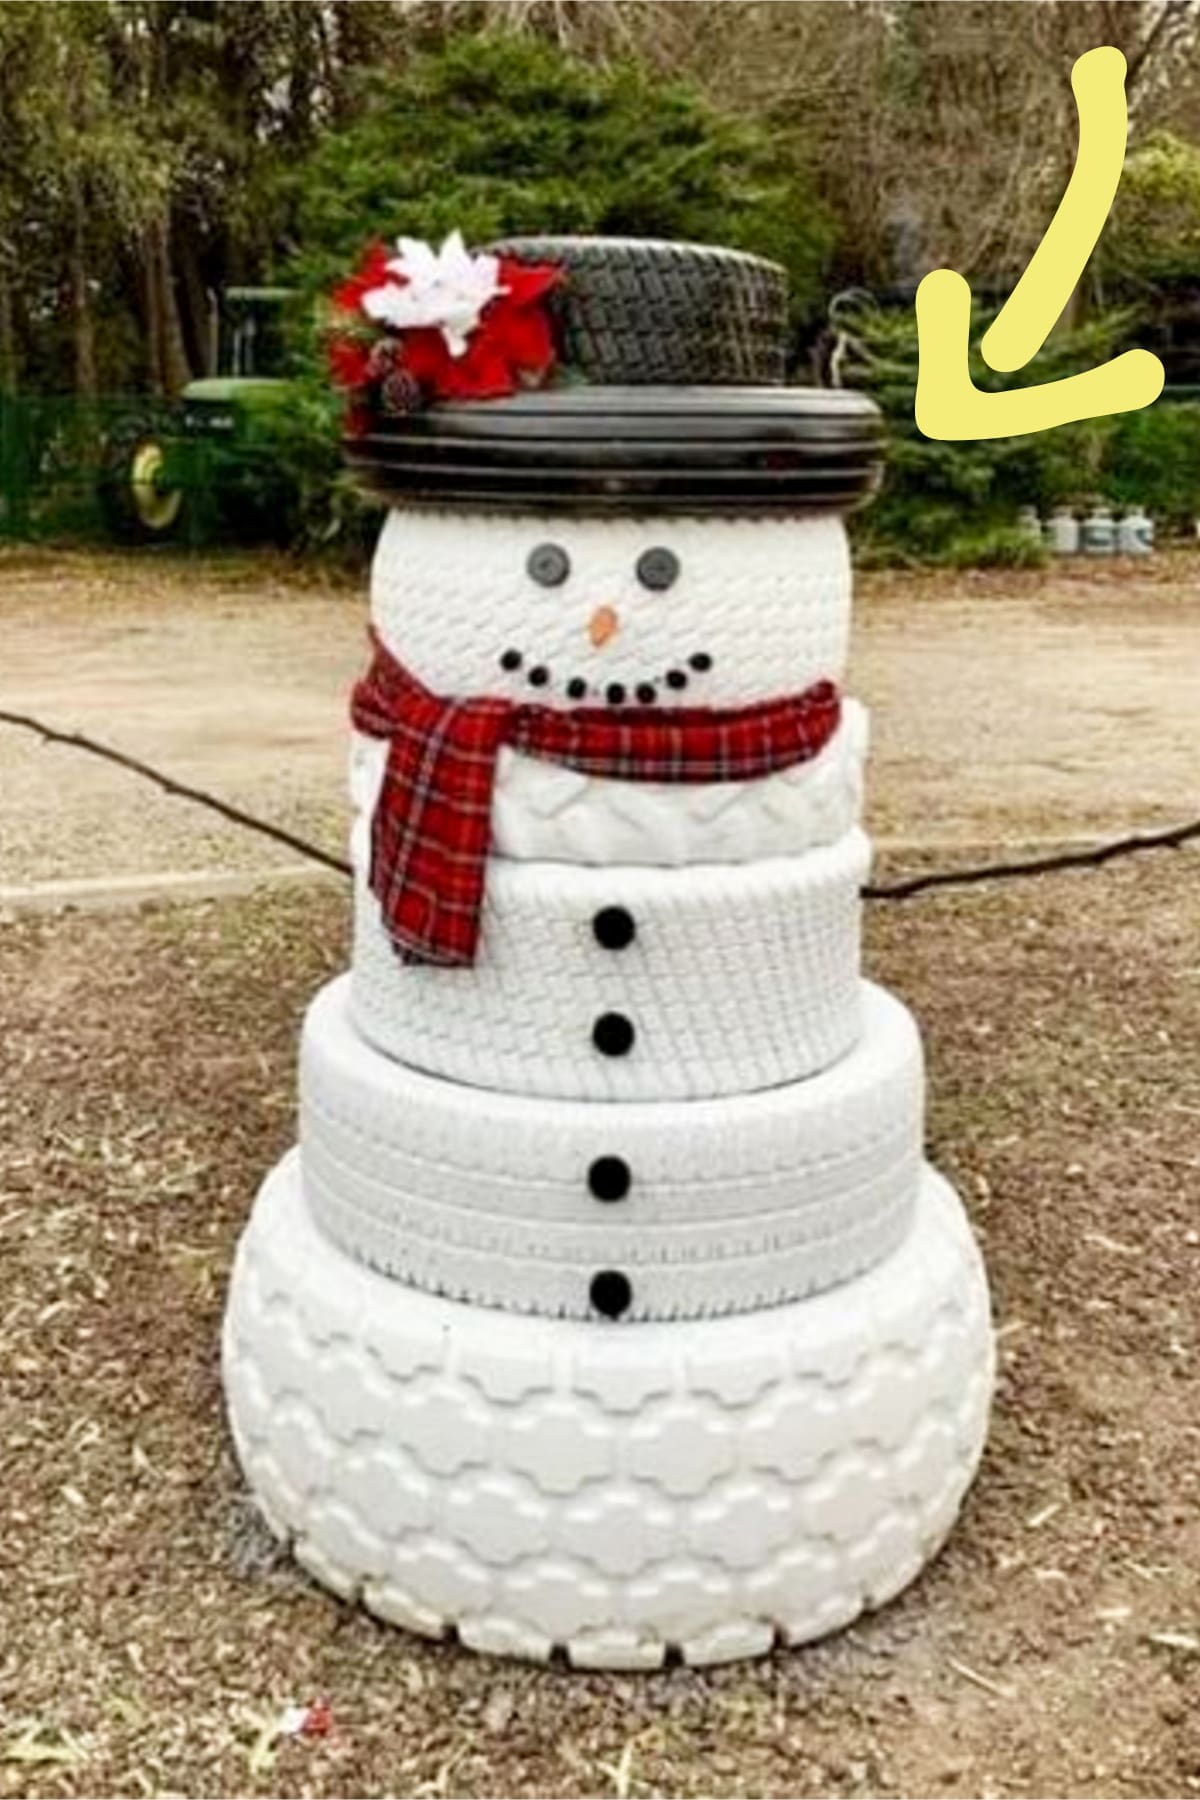 snowman made from tires